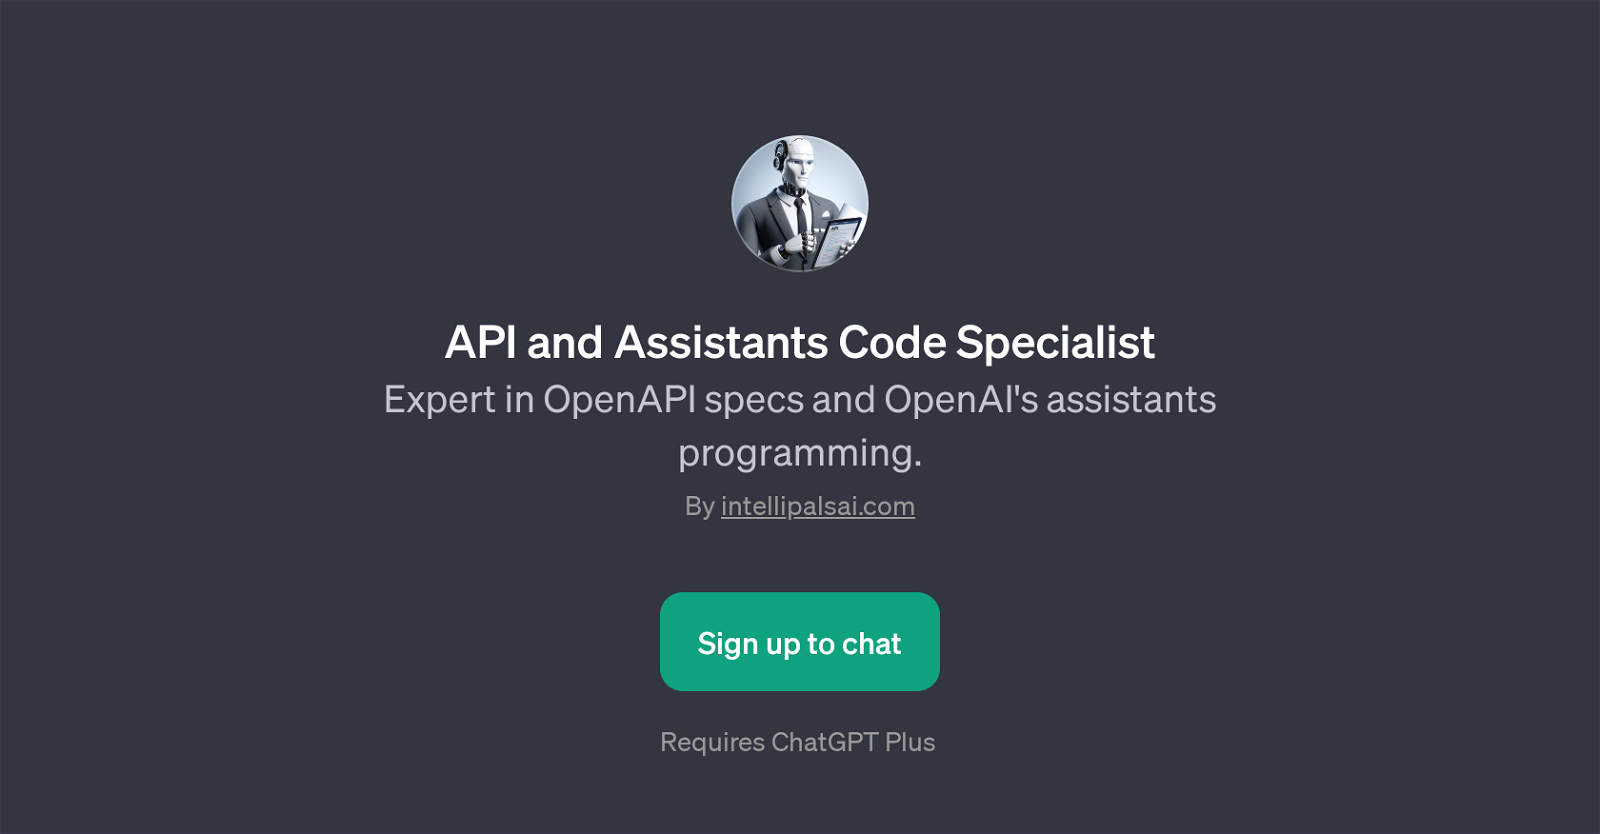 API and Assistants Code Specialist website